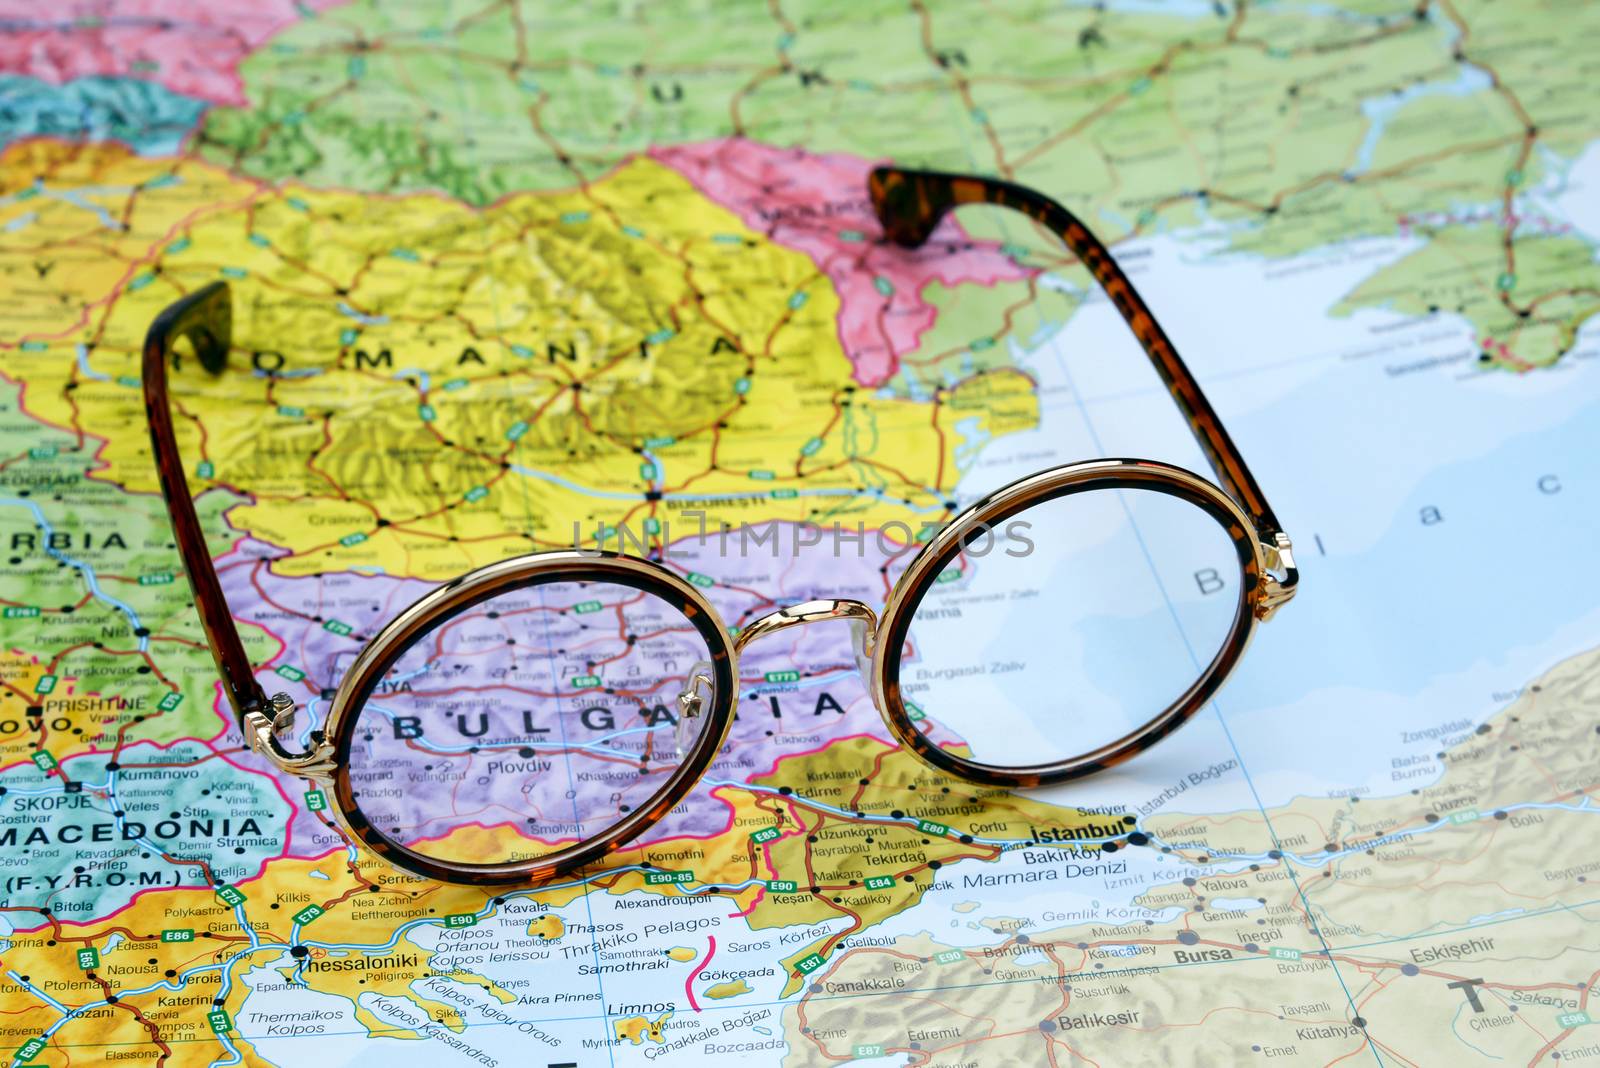 Glasses on a map of europe - Bulgaria by dk_photos